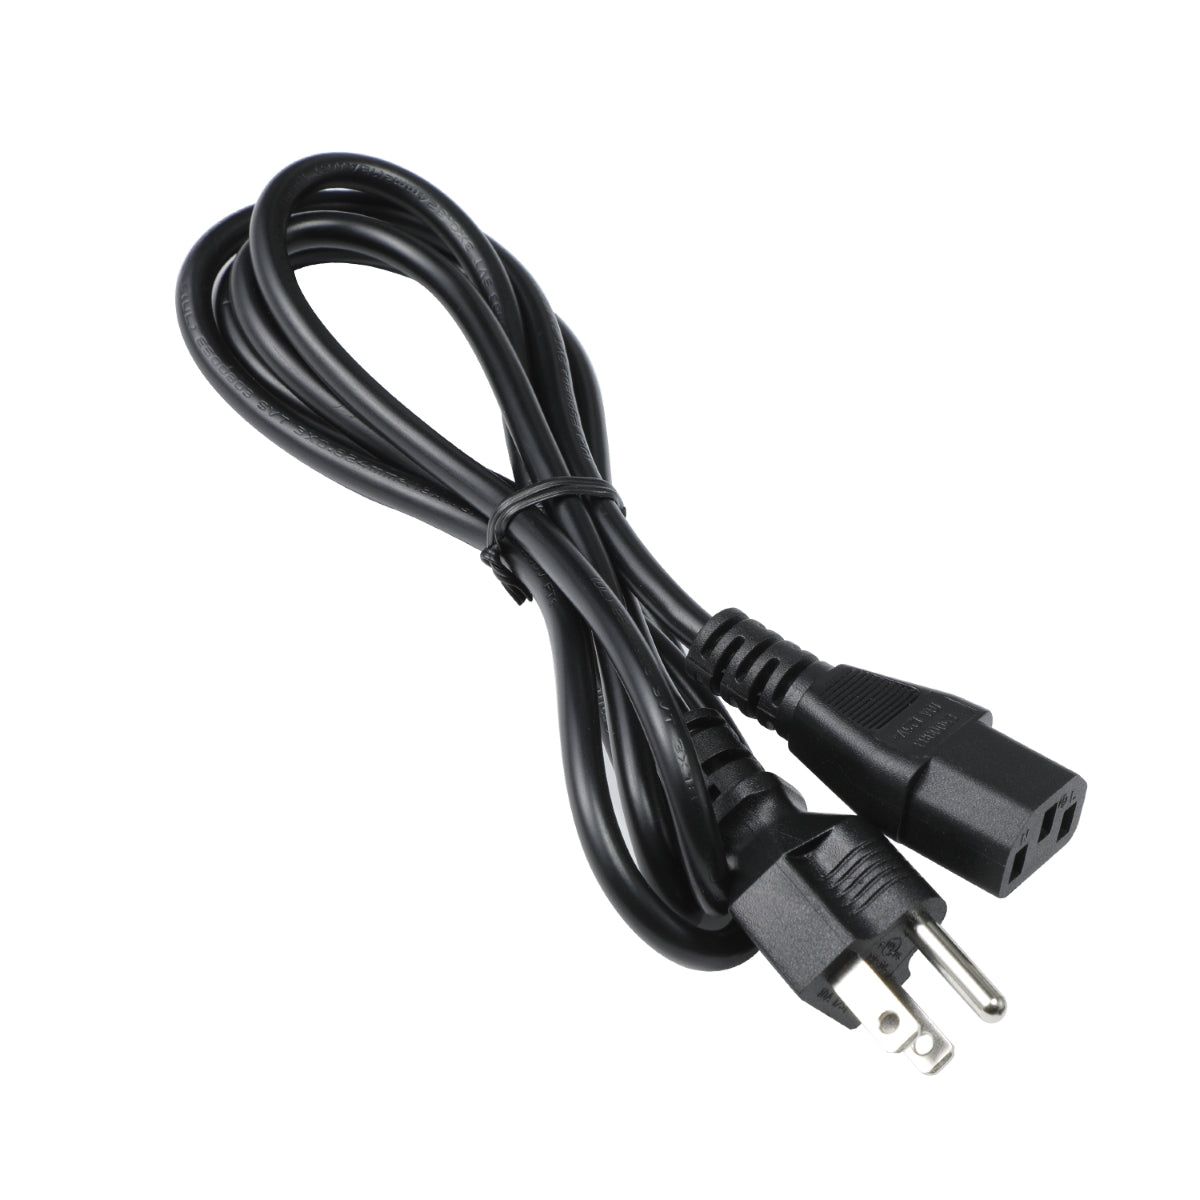 Power Cable for Philips 245B1 Monitor.